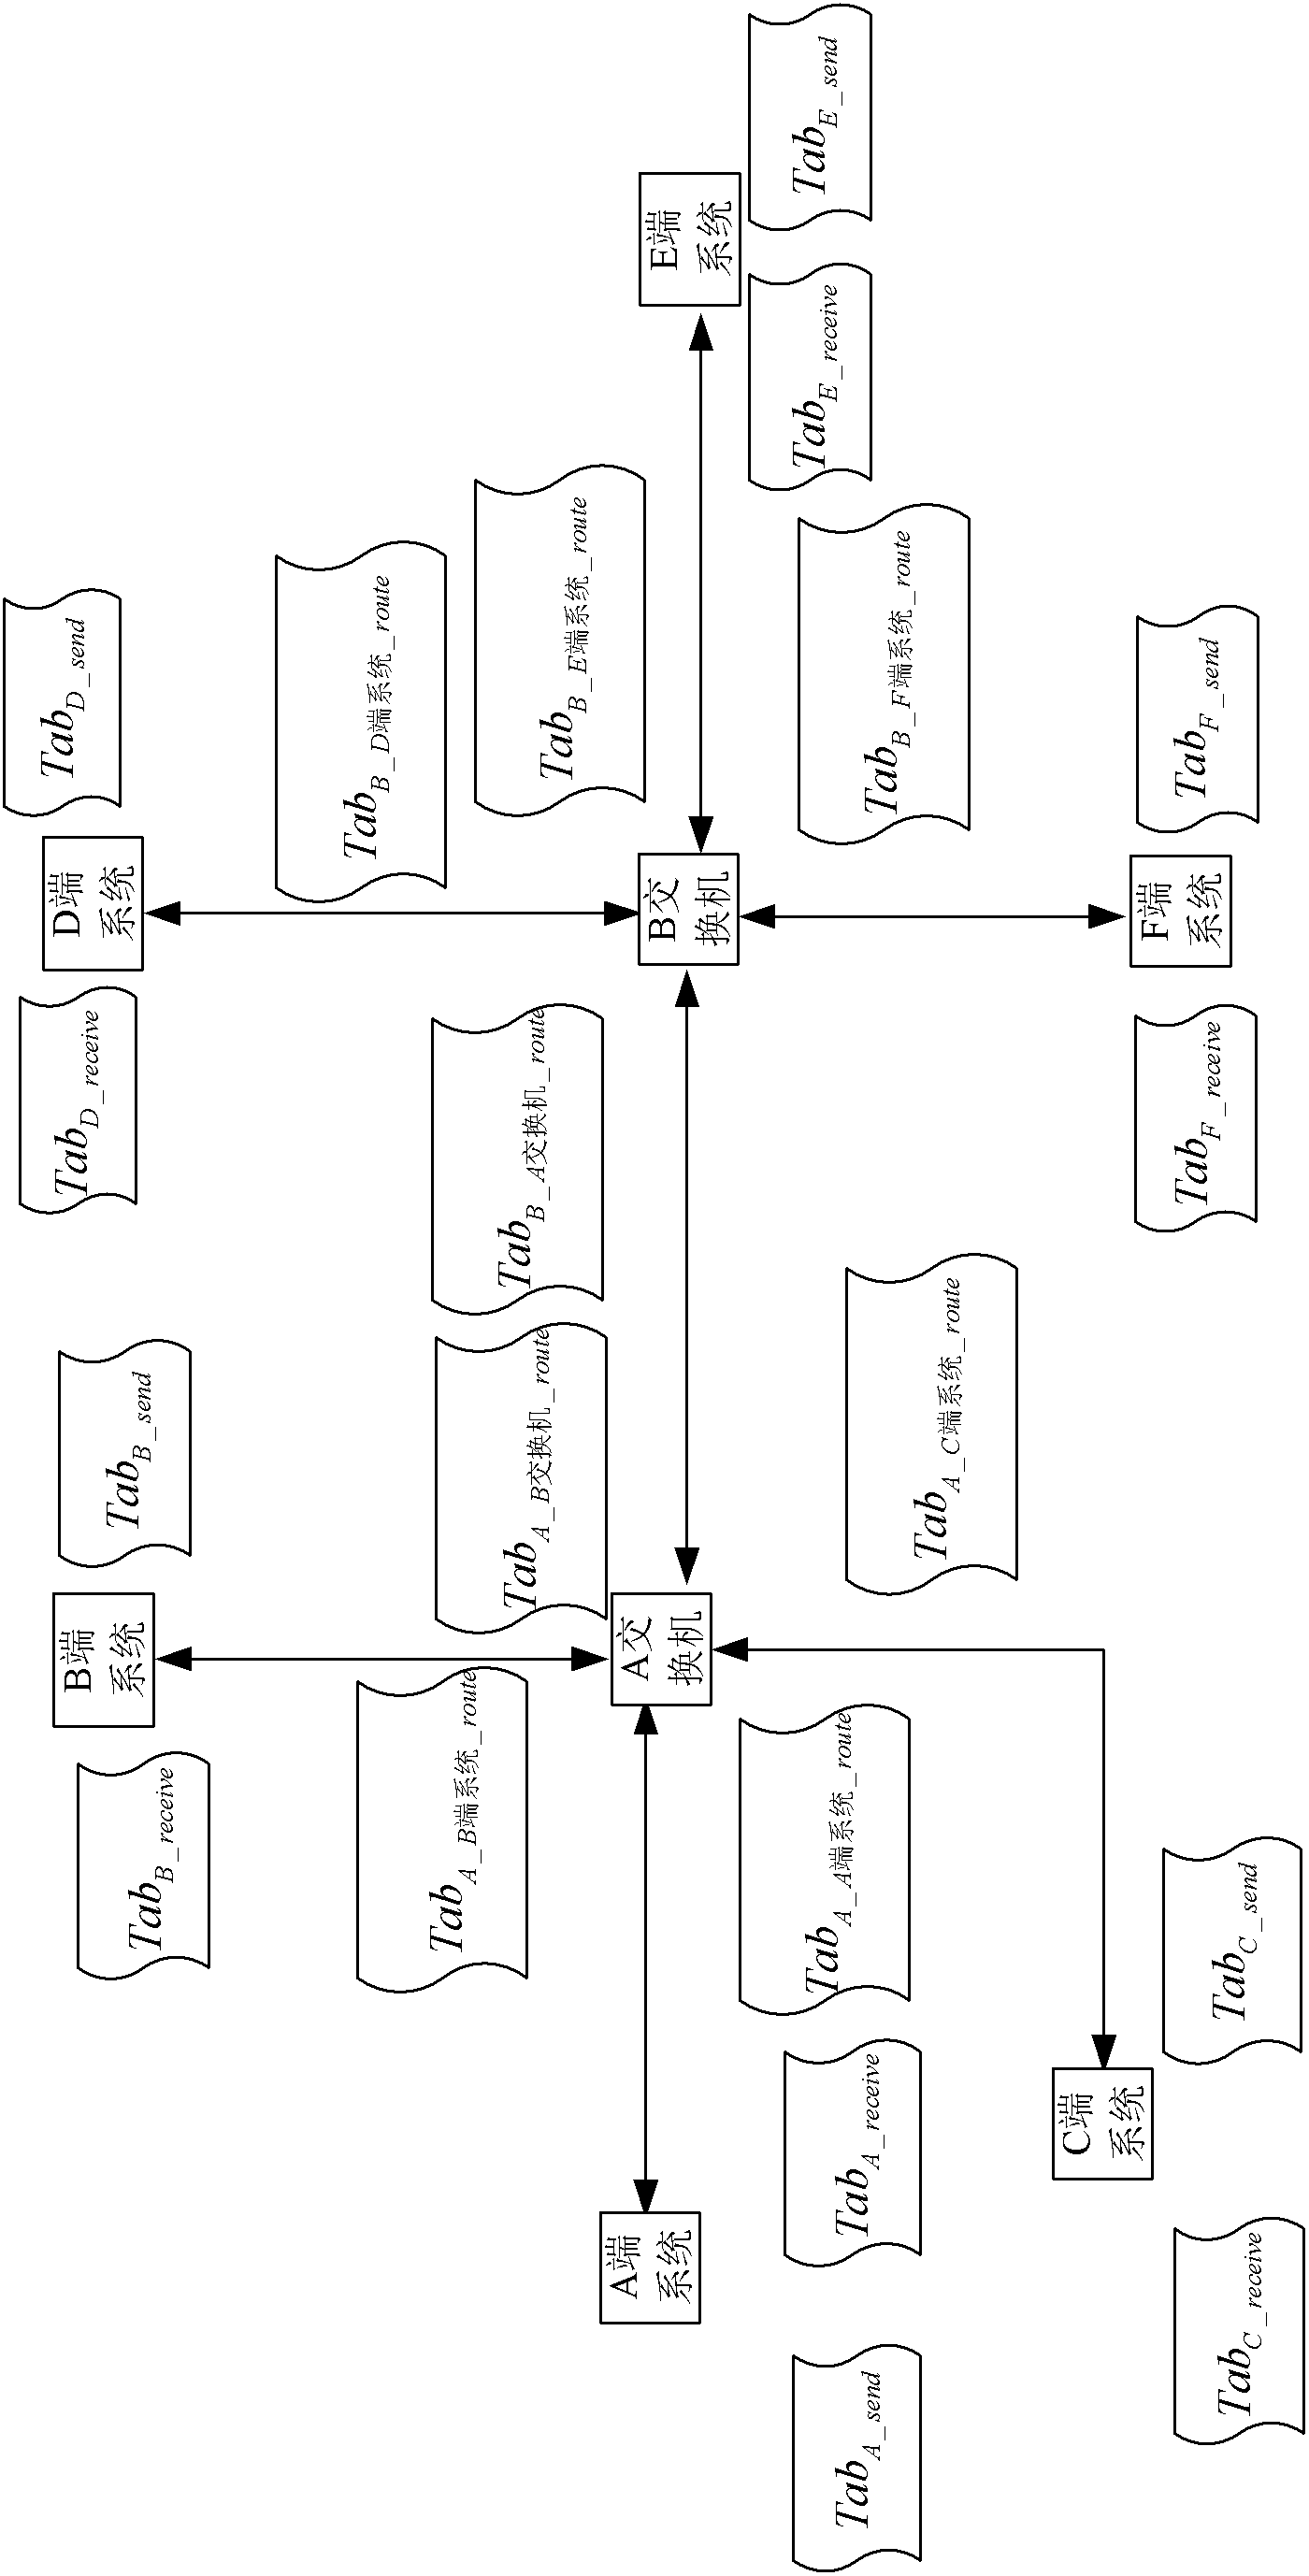 Periodic scheduling timetable construction method applied to time-triggered switched network